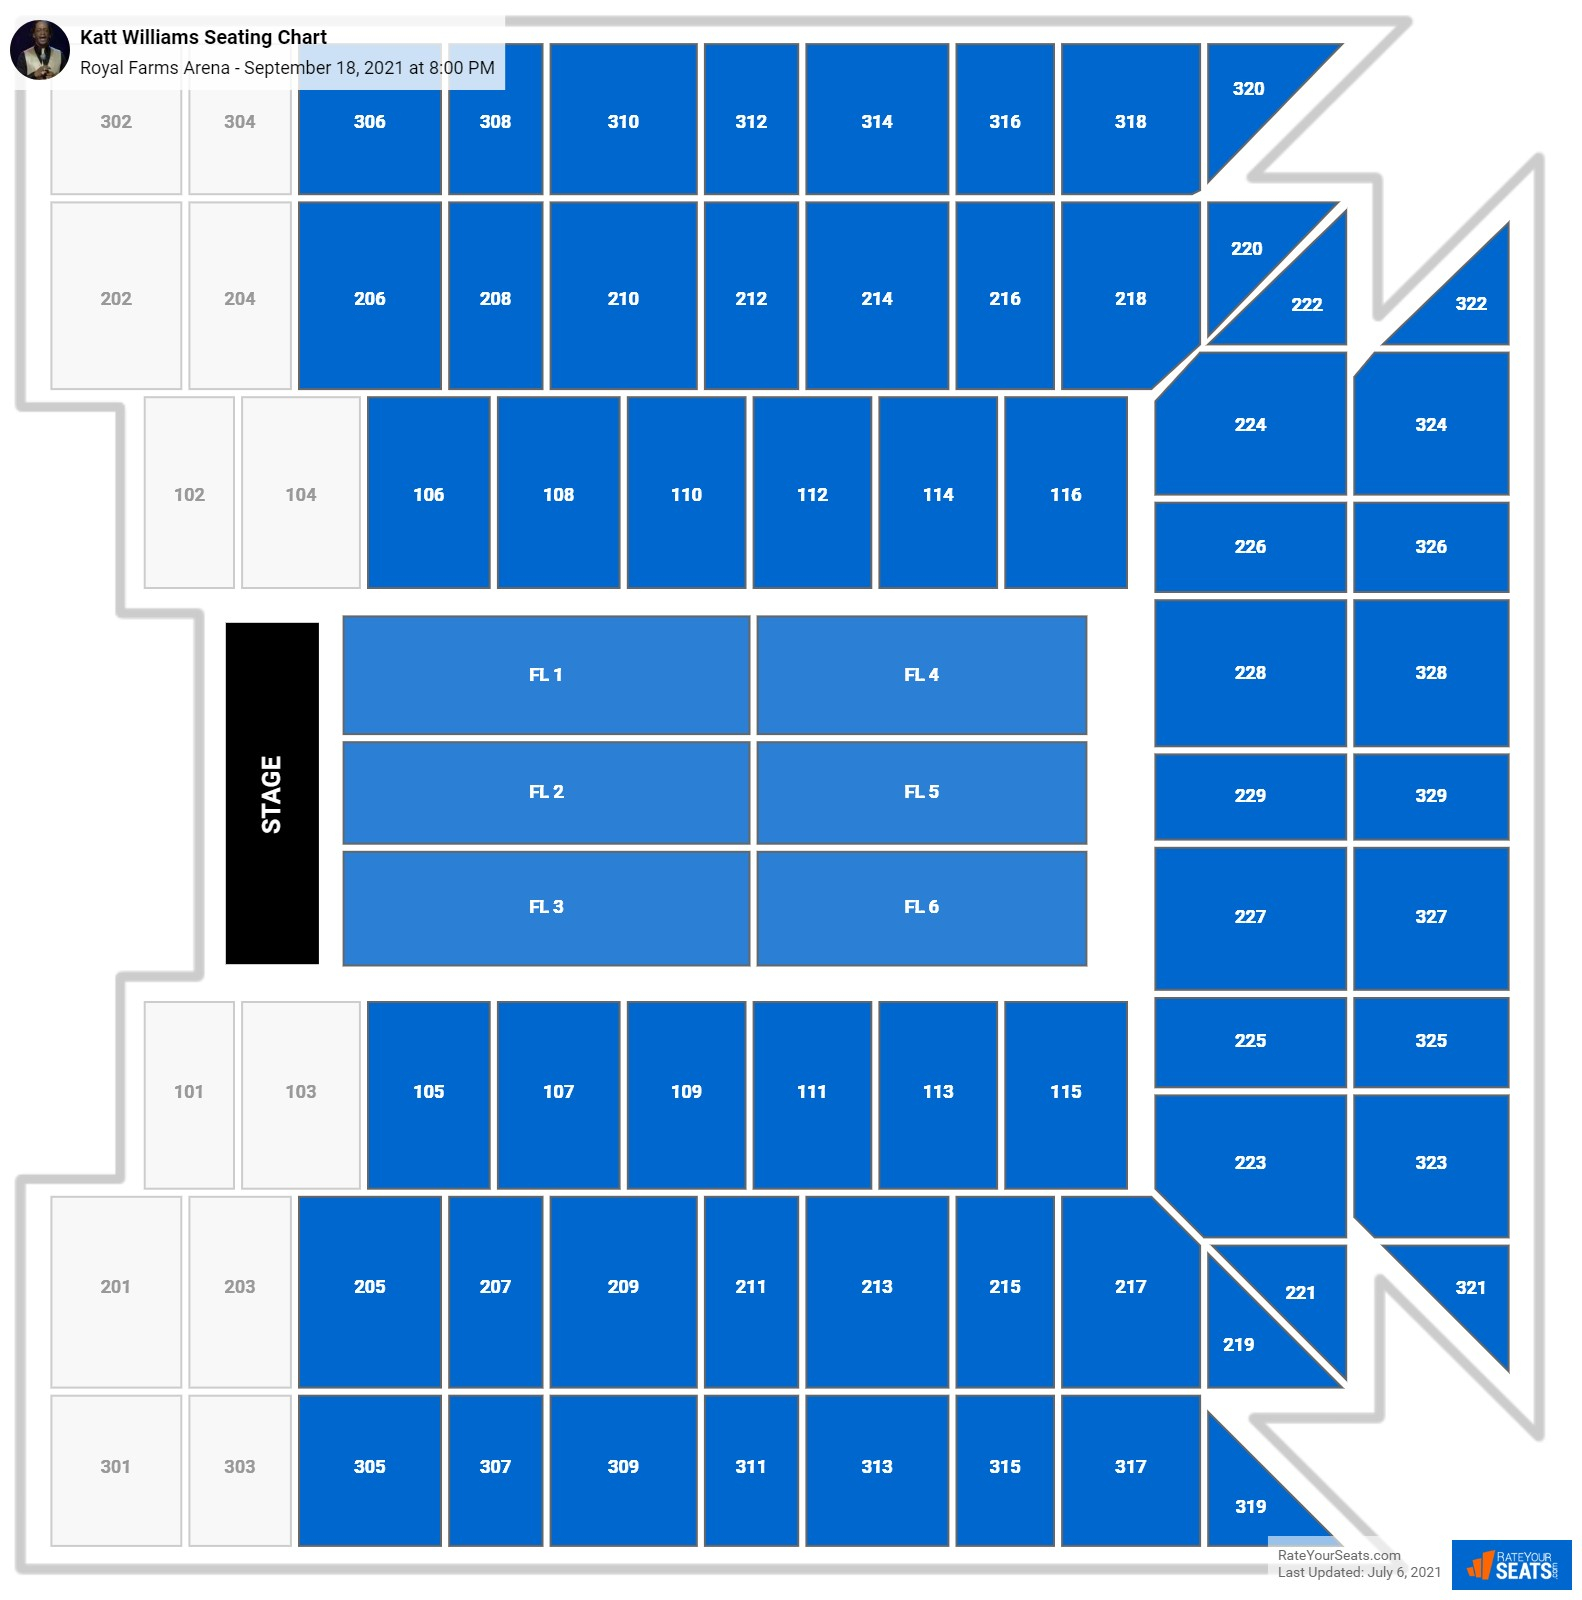 Royal Farms Arena Seating Chart RateYourSeats